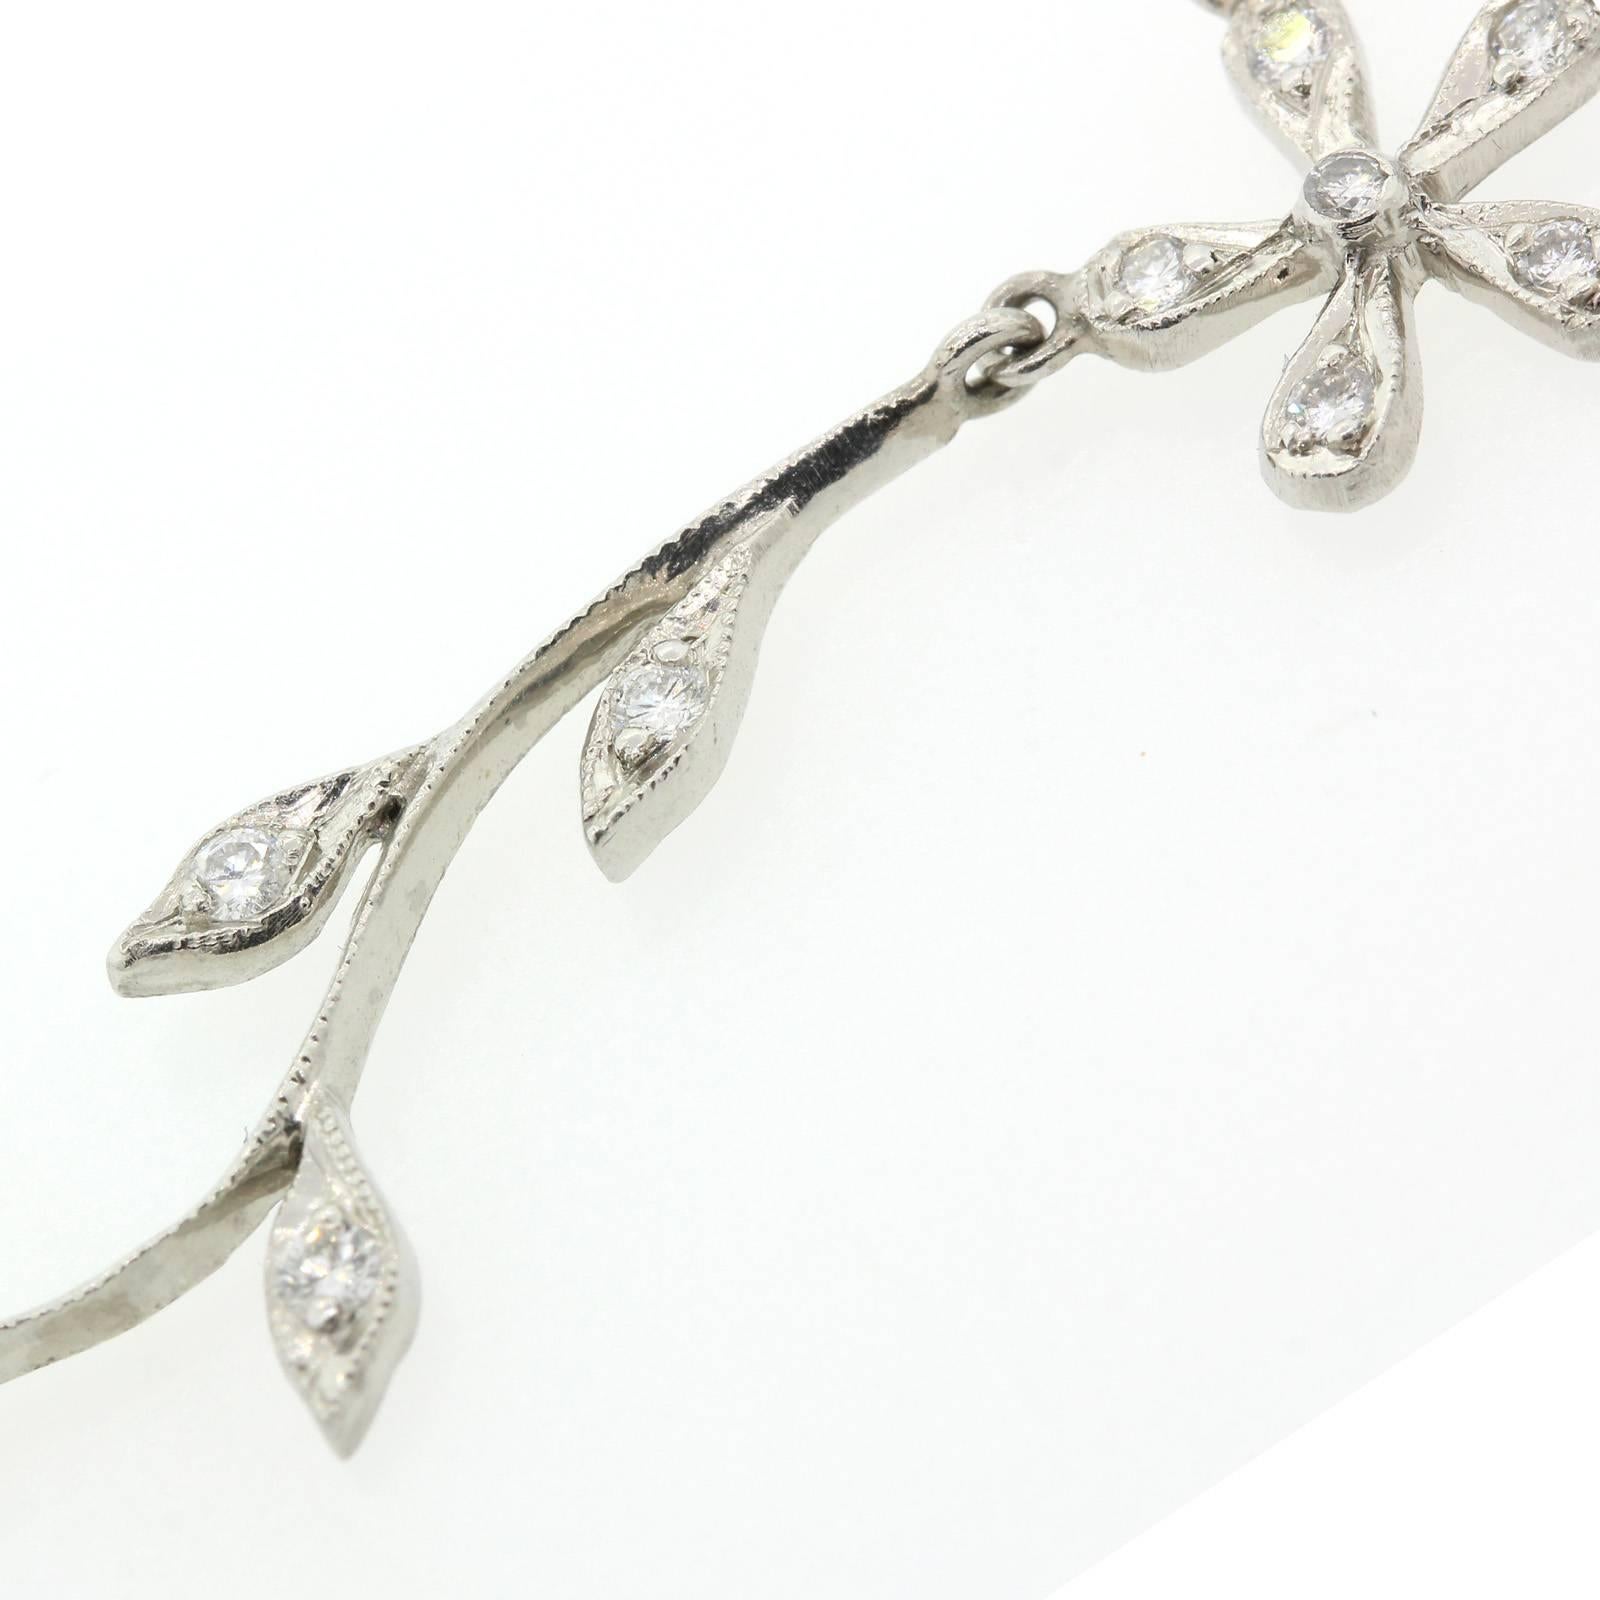 Quintessential Cathy Waterman diamond and platinum daisy and flowing leaf  necklace.  This sixteen inch long necklace is composed of ten daises joined by eleven flowing leafy vines.  It is set with approximately 2.00 carats of Round Brilliant cut